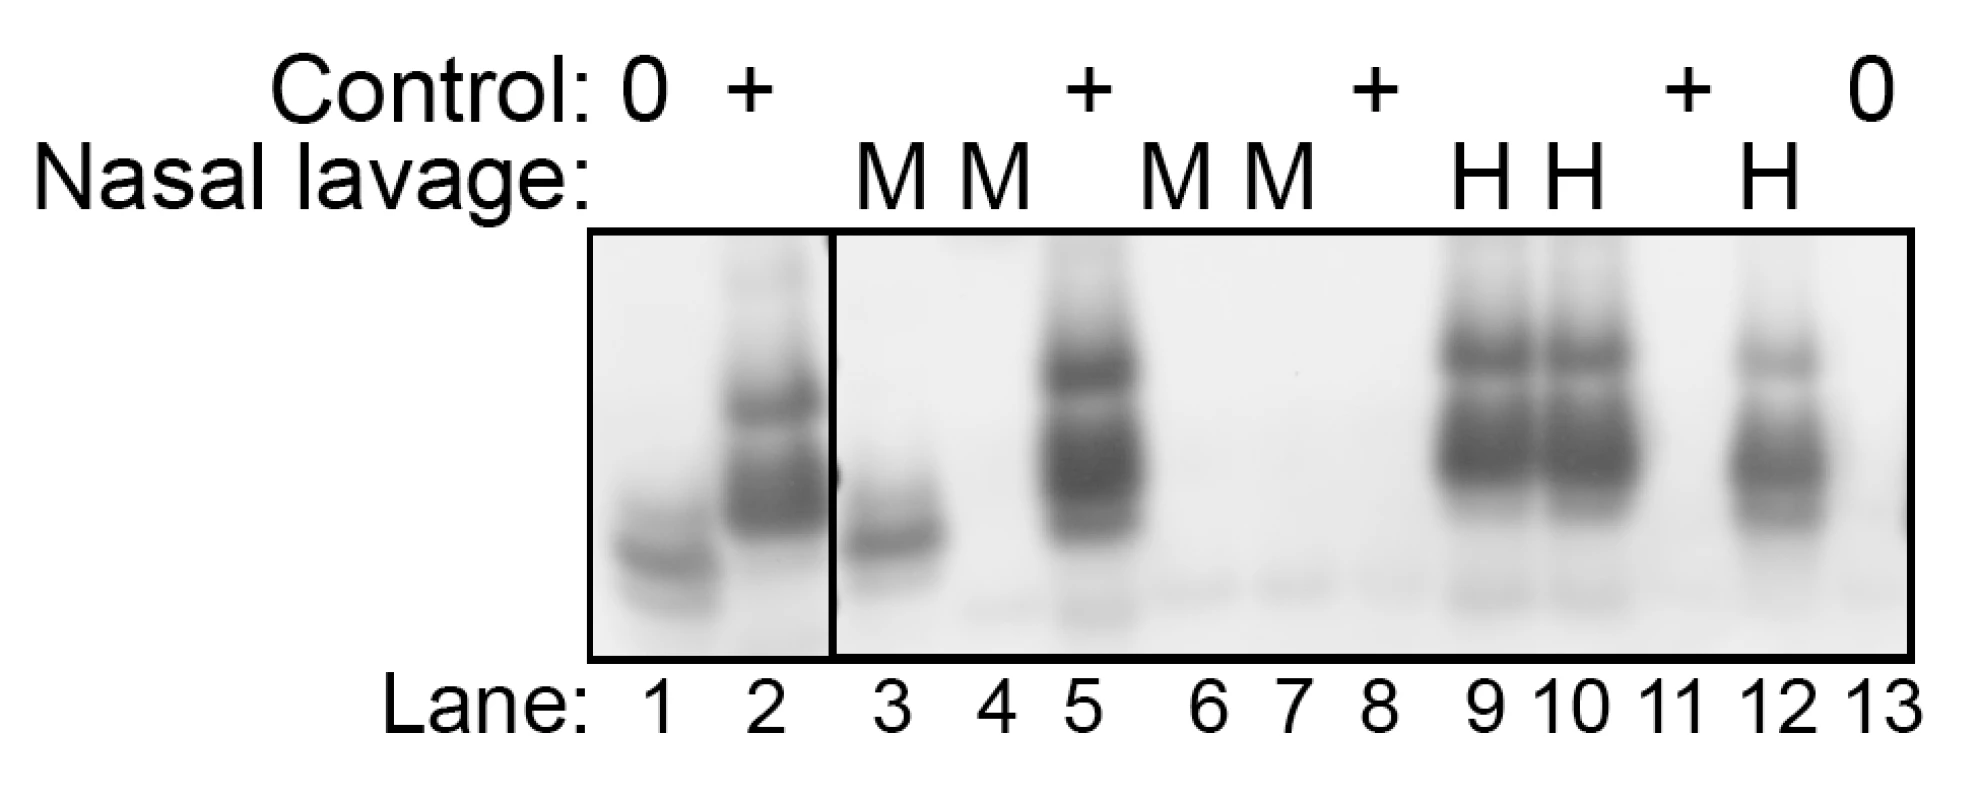 Western blot detection of HY TME infection in nasal lavages using the QuIC assay.